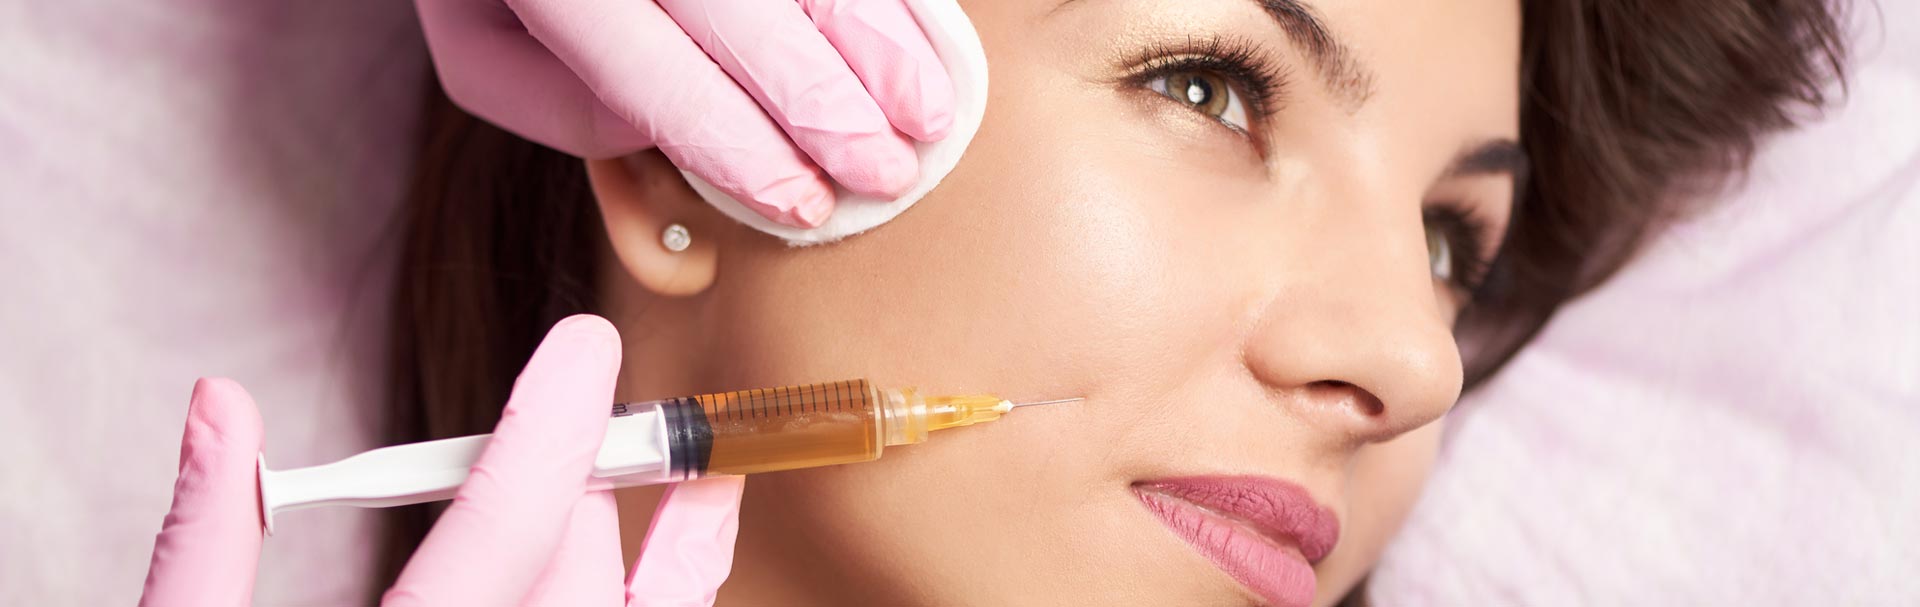 Woman getting dermal fillers injection